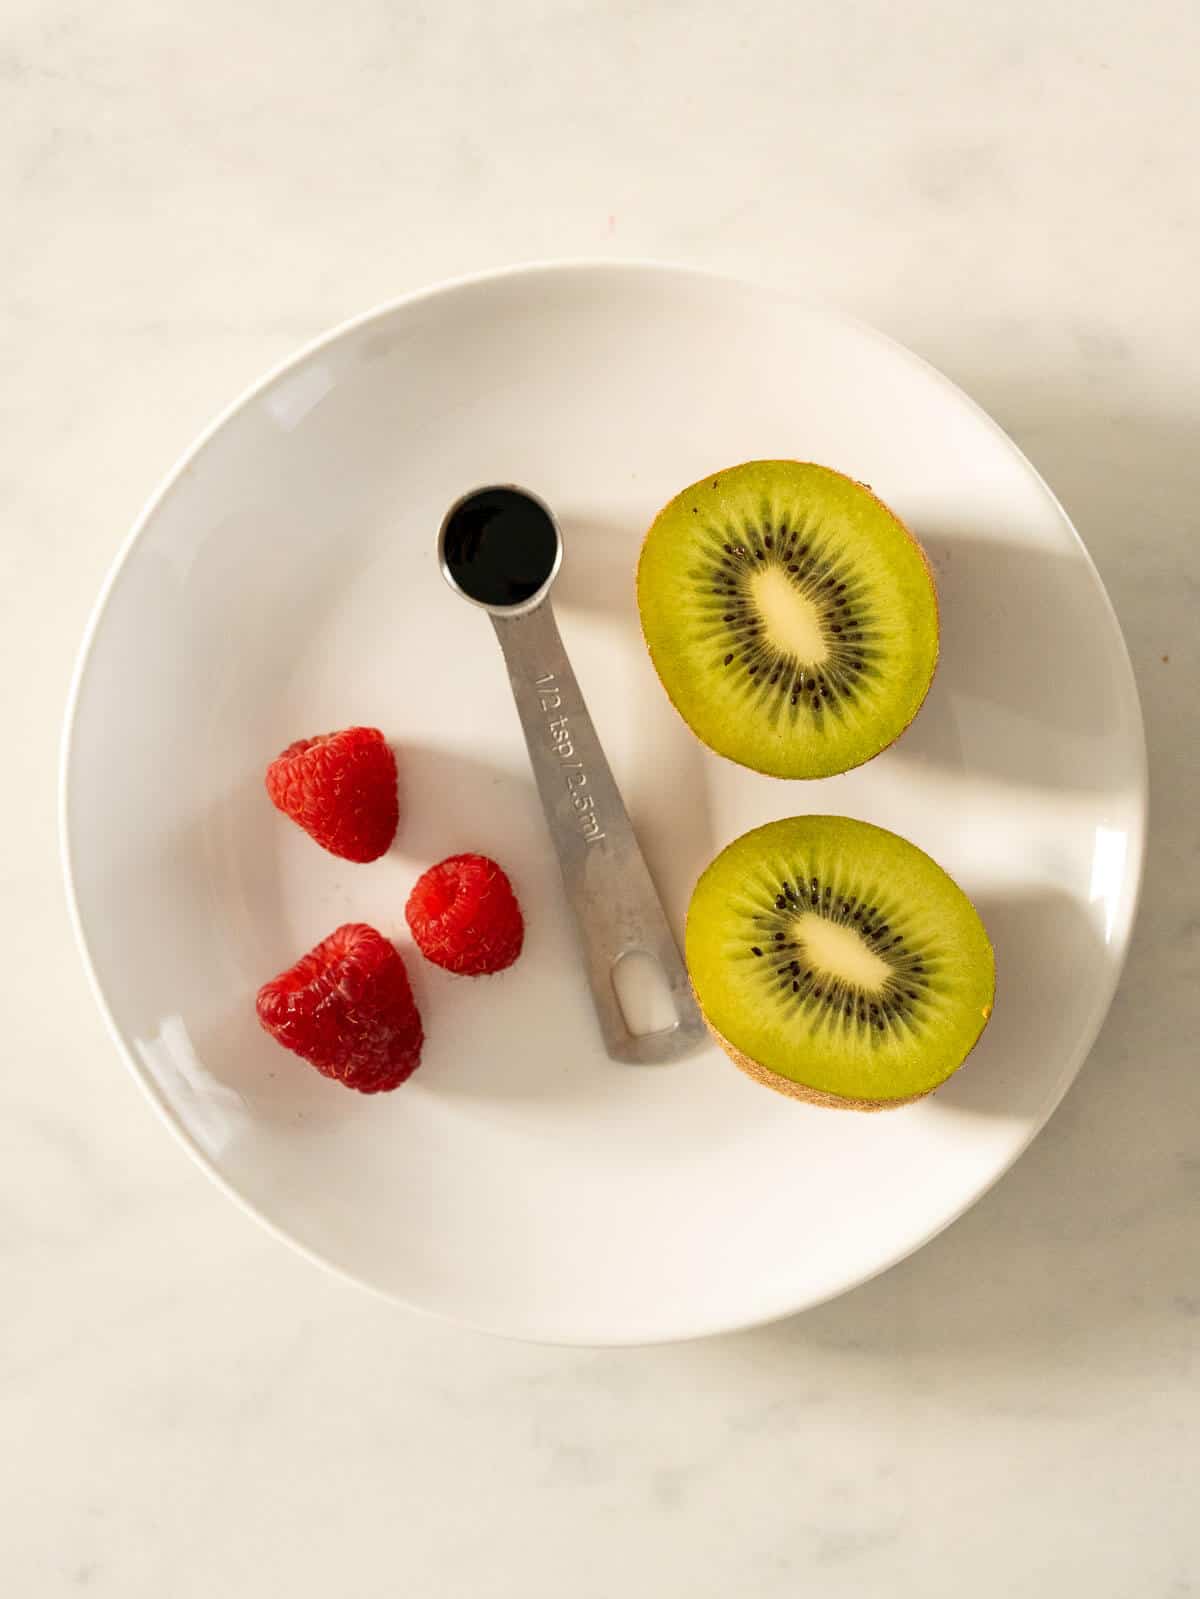 optional ingredients for the oat milk chia pudding: red frui, vanilla extract and kiwi fruit.